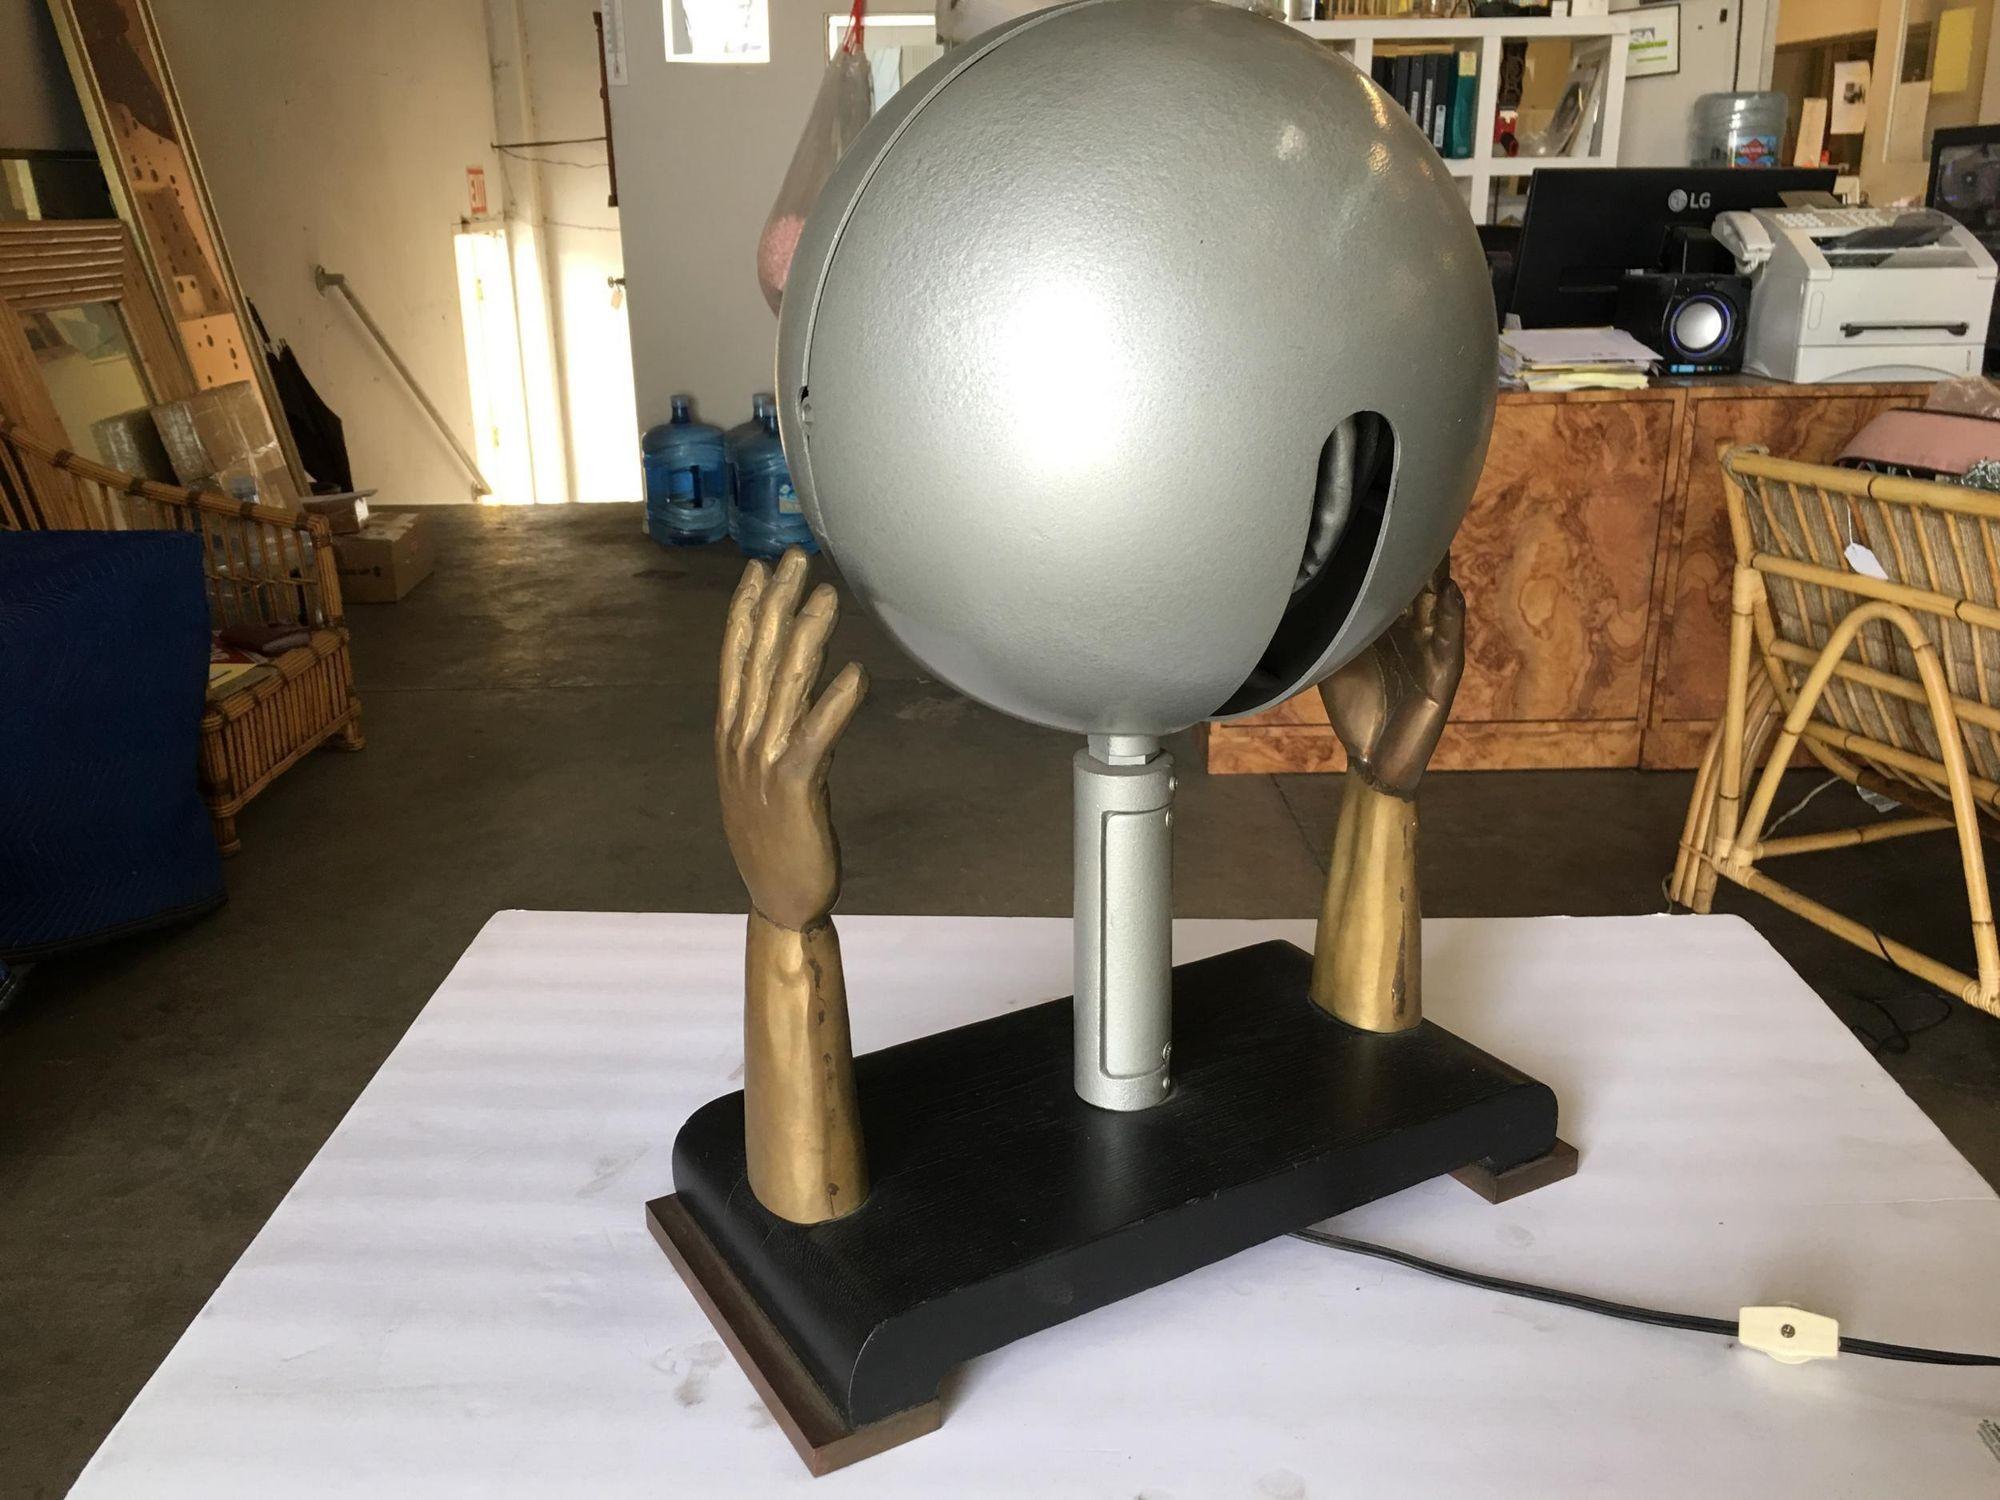 Original 1930's custom made table lamp featuring a pair of hand-cast bronze hands fixed to a lacquered wood base with a center spotlight. The spotlight takes a standard light bulb and is positional up and down and left to right.